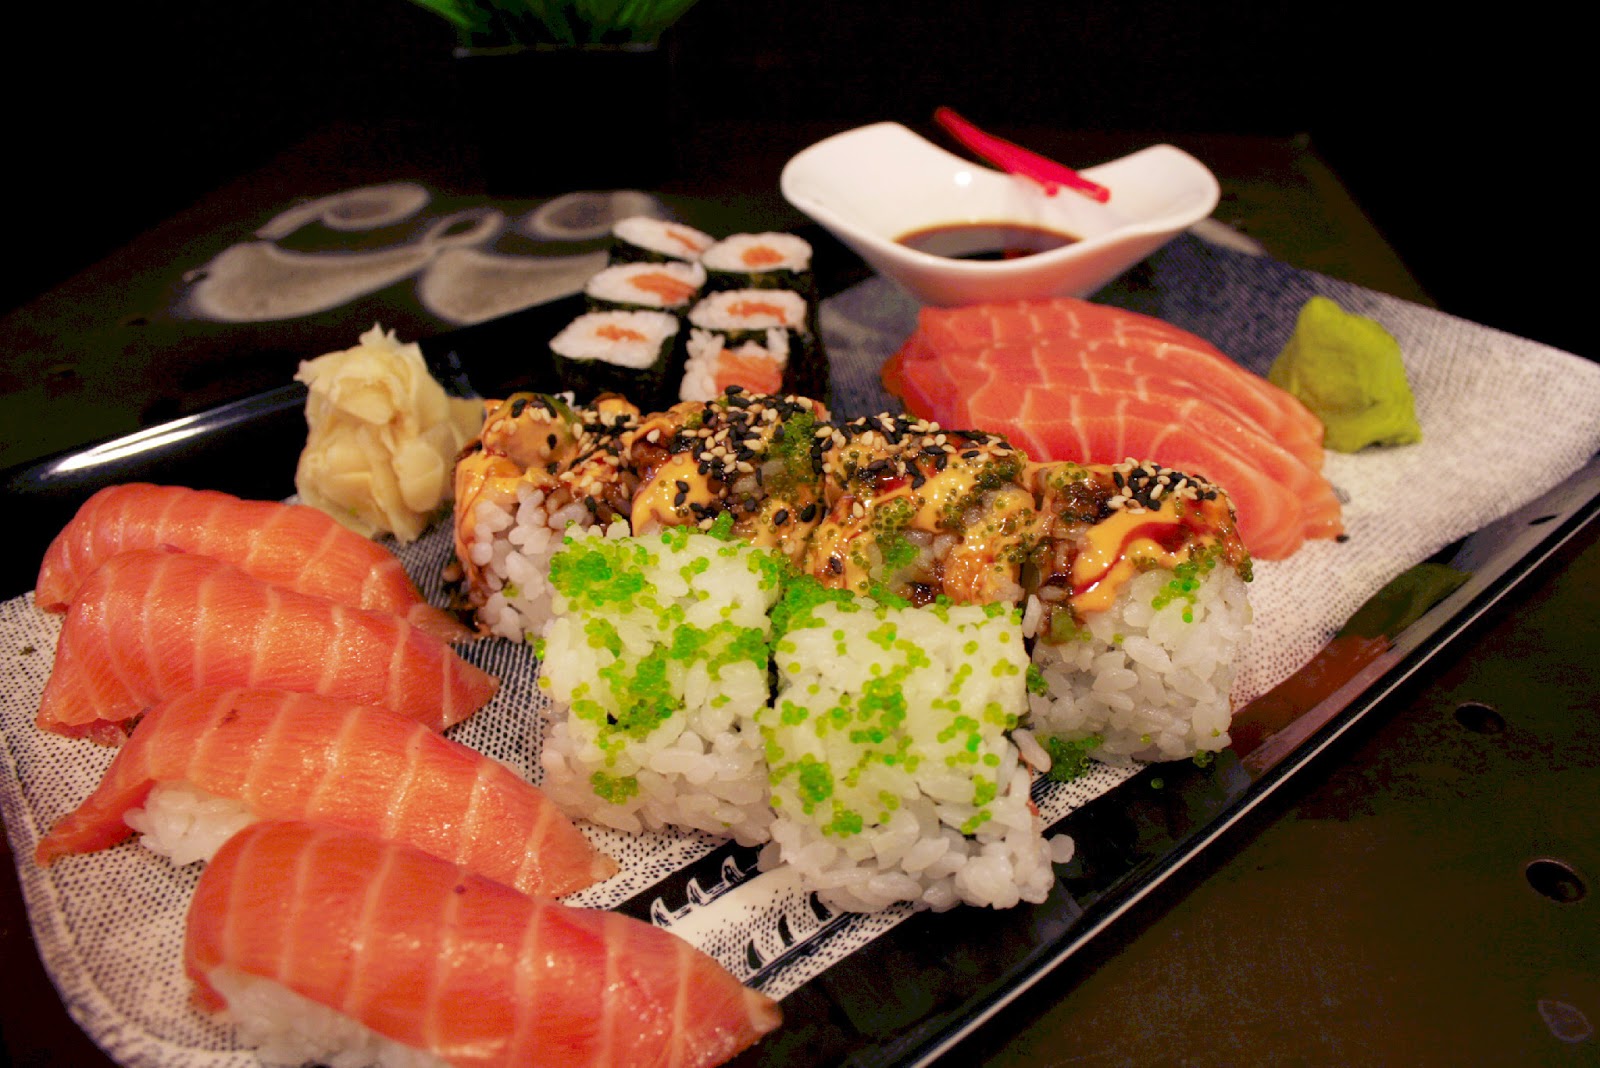 A freshly rolled selection of sushi from Zero juice and sushi in Berkhamsted